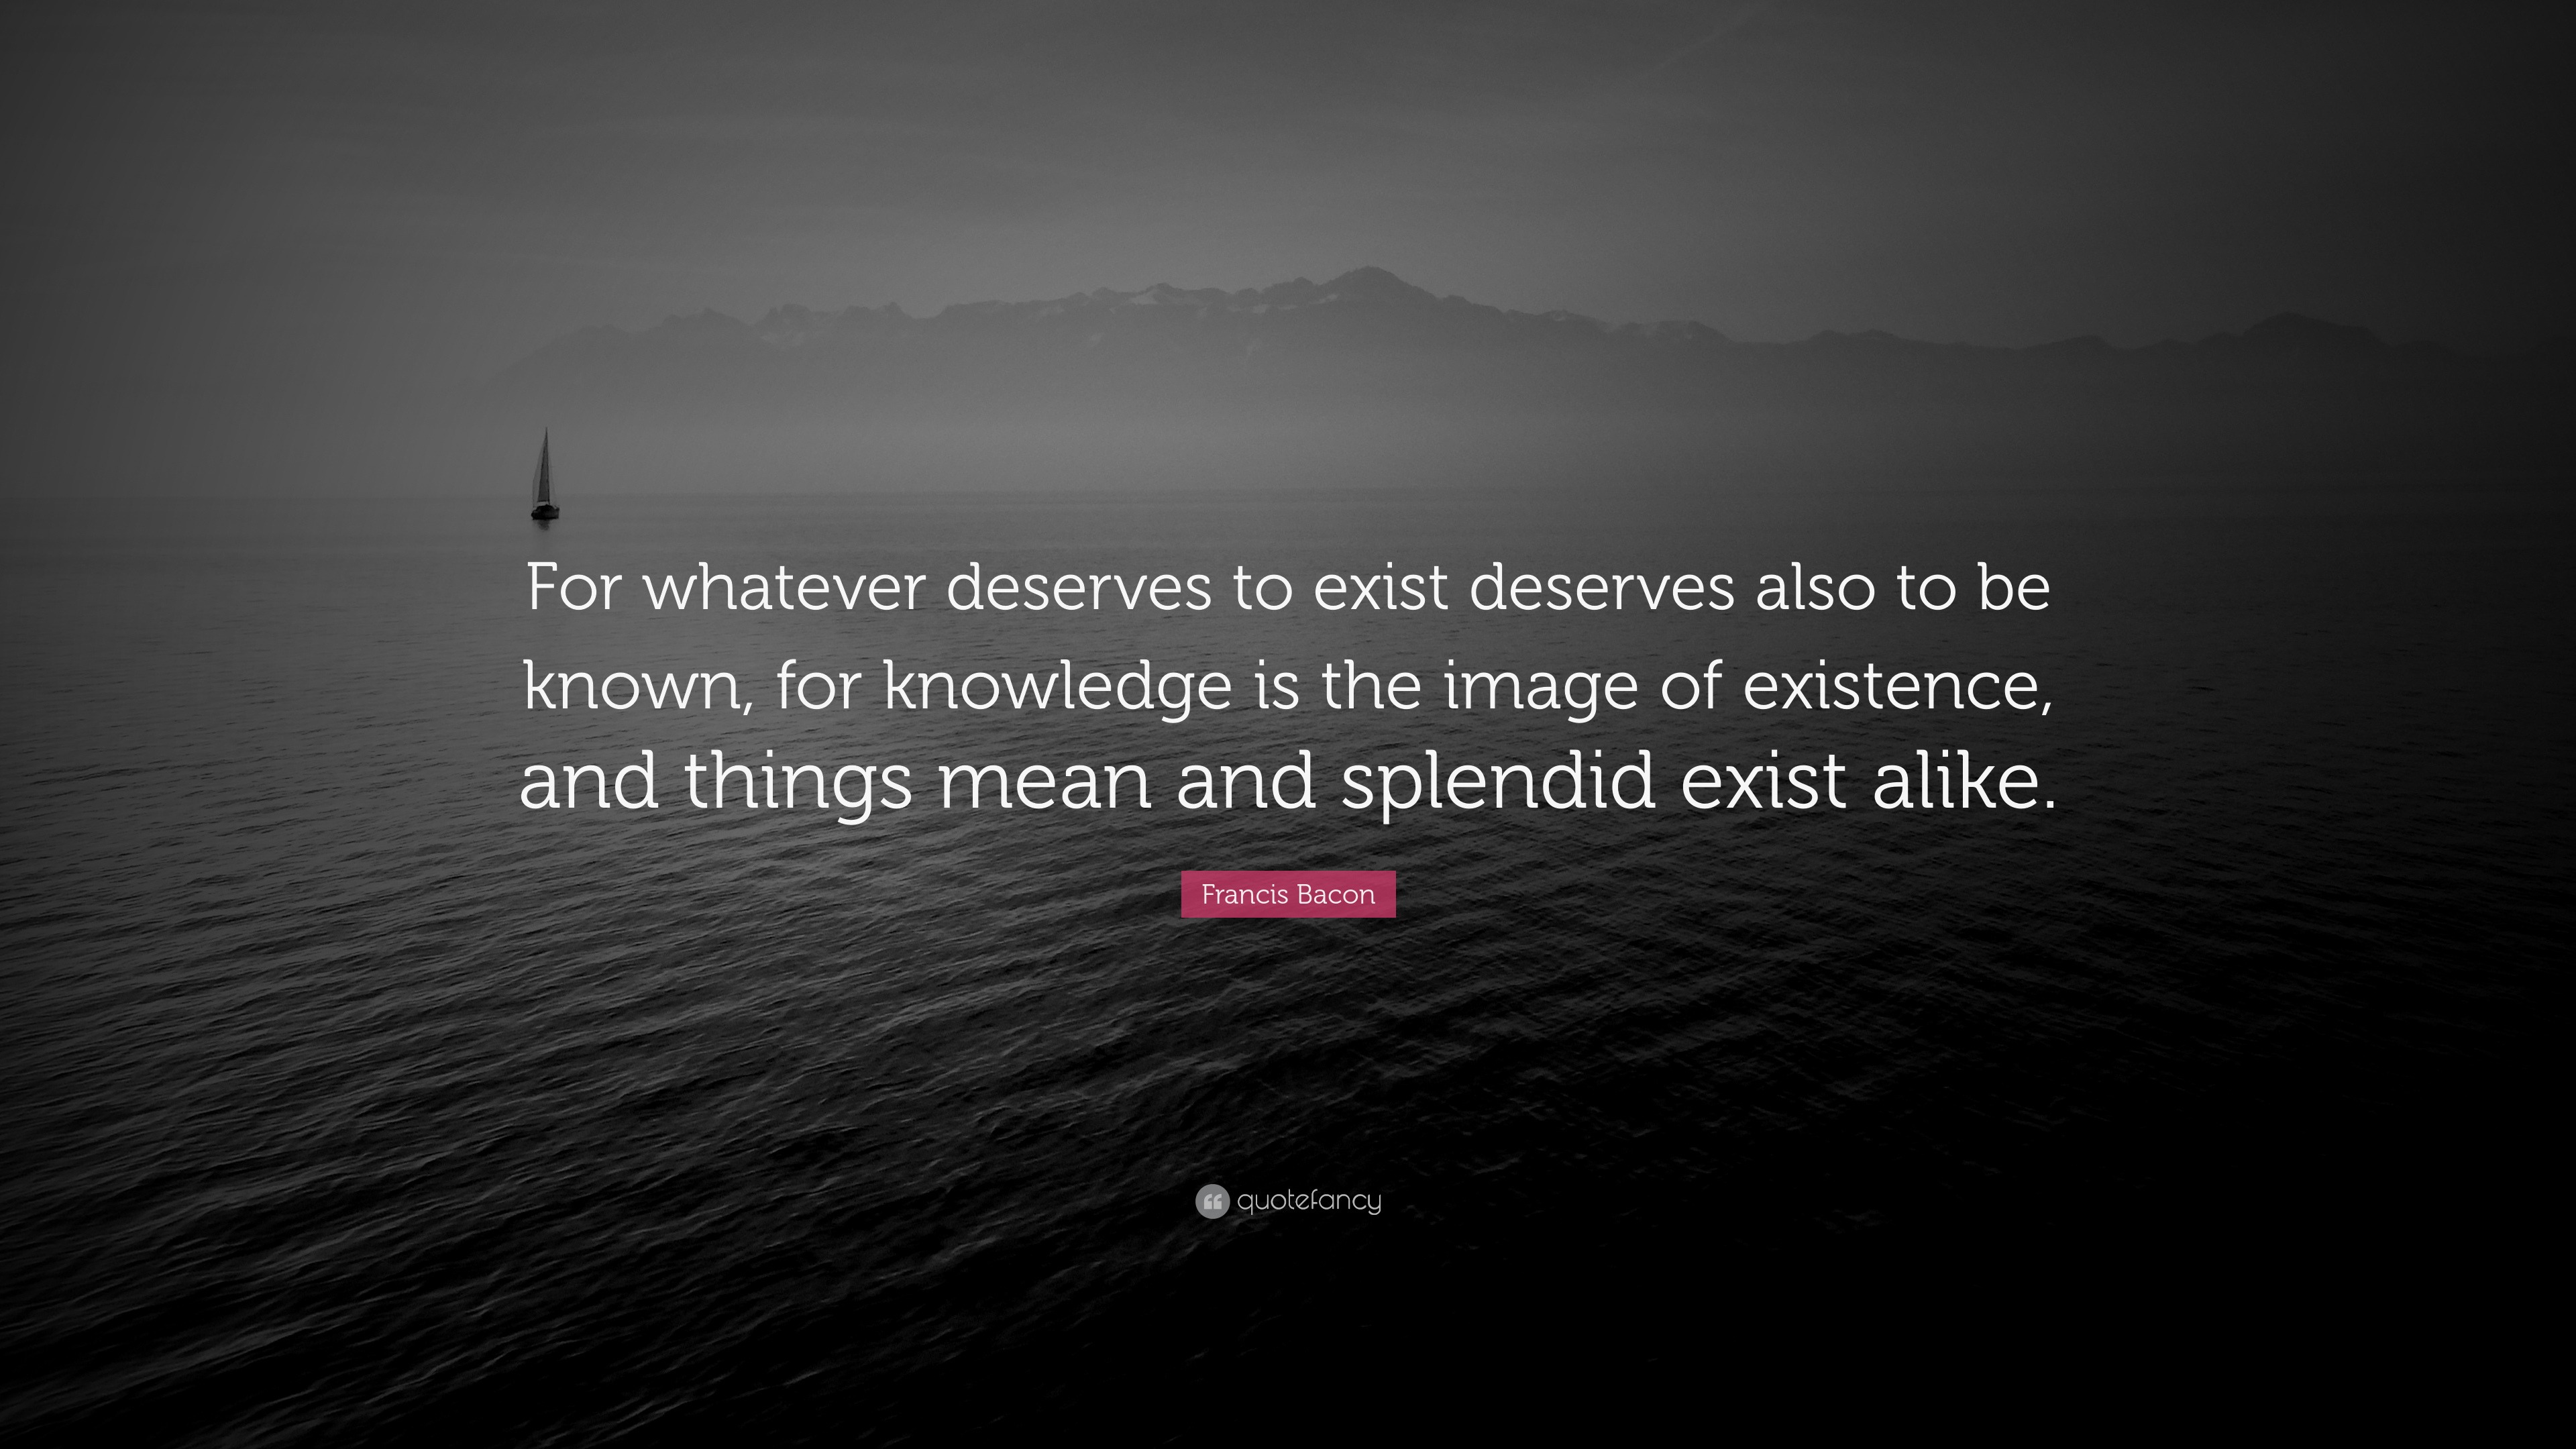 Francis Bacon Quote “for Whatever Deserves To Exist Deserves Also To Be Known For Knowledge Is